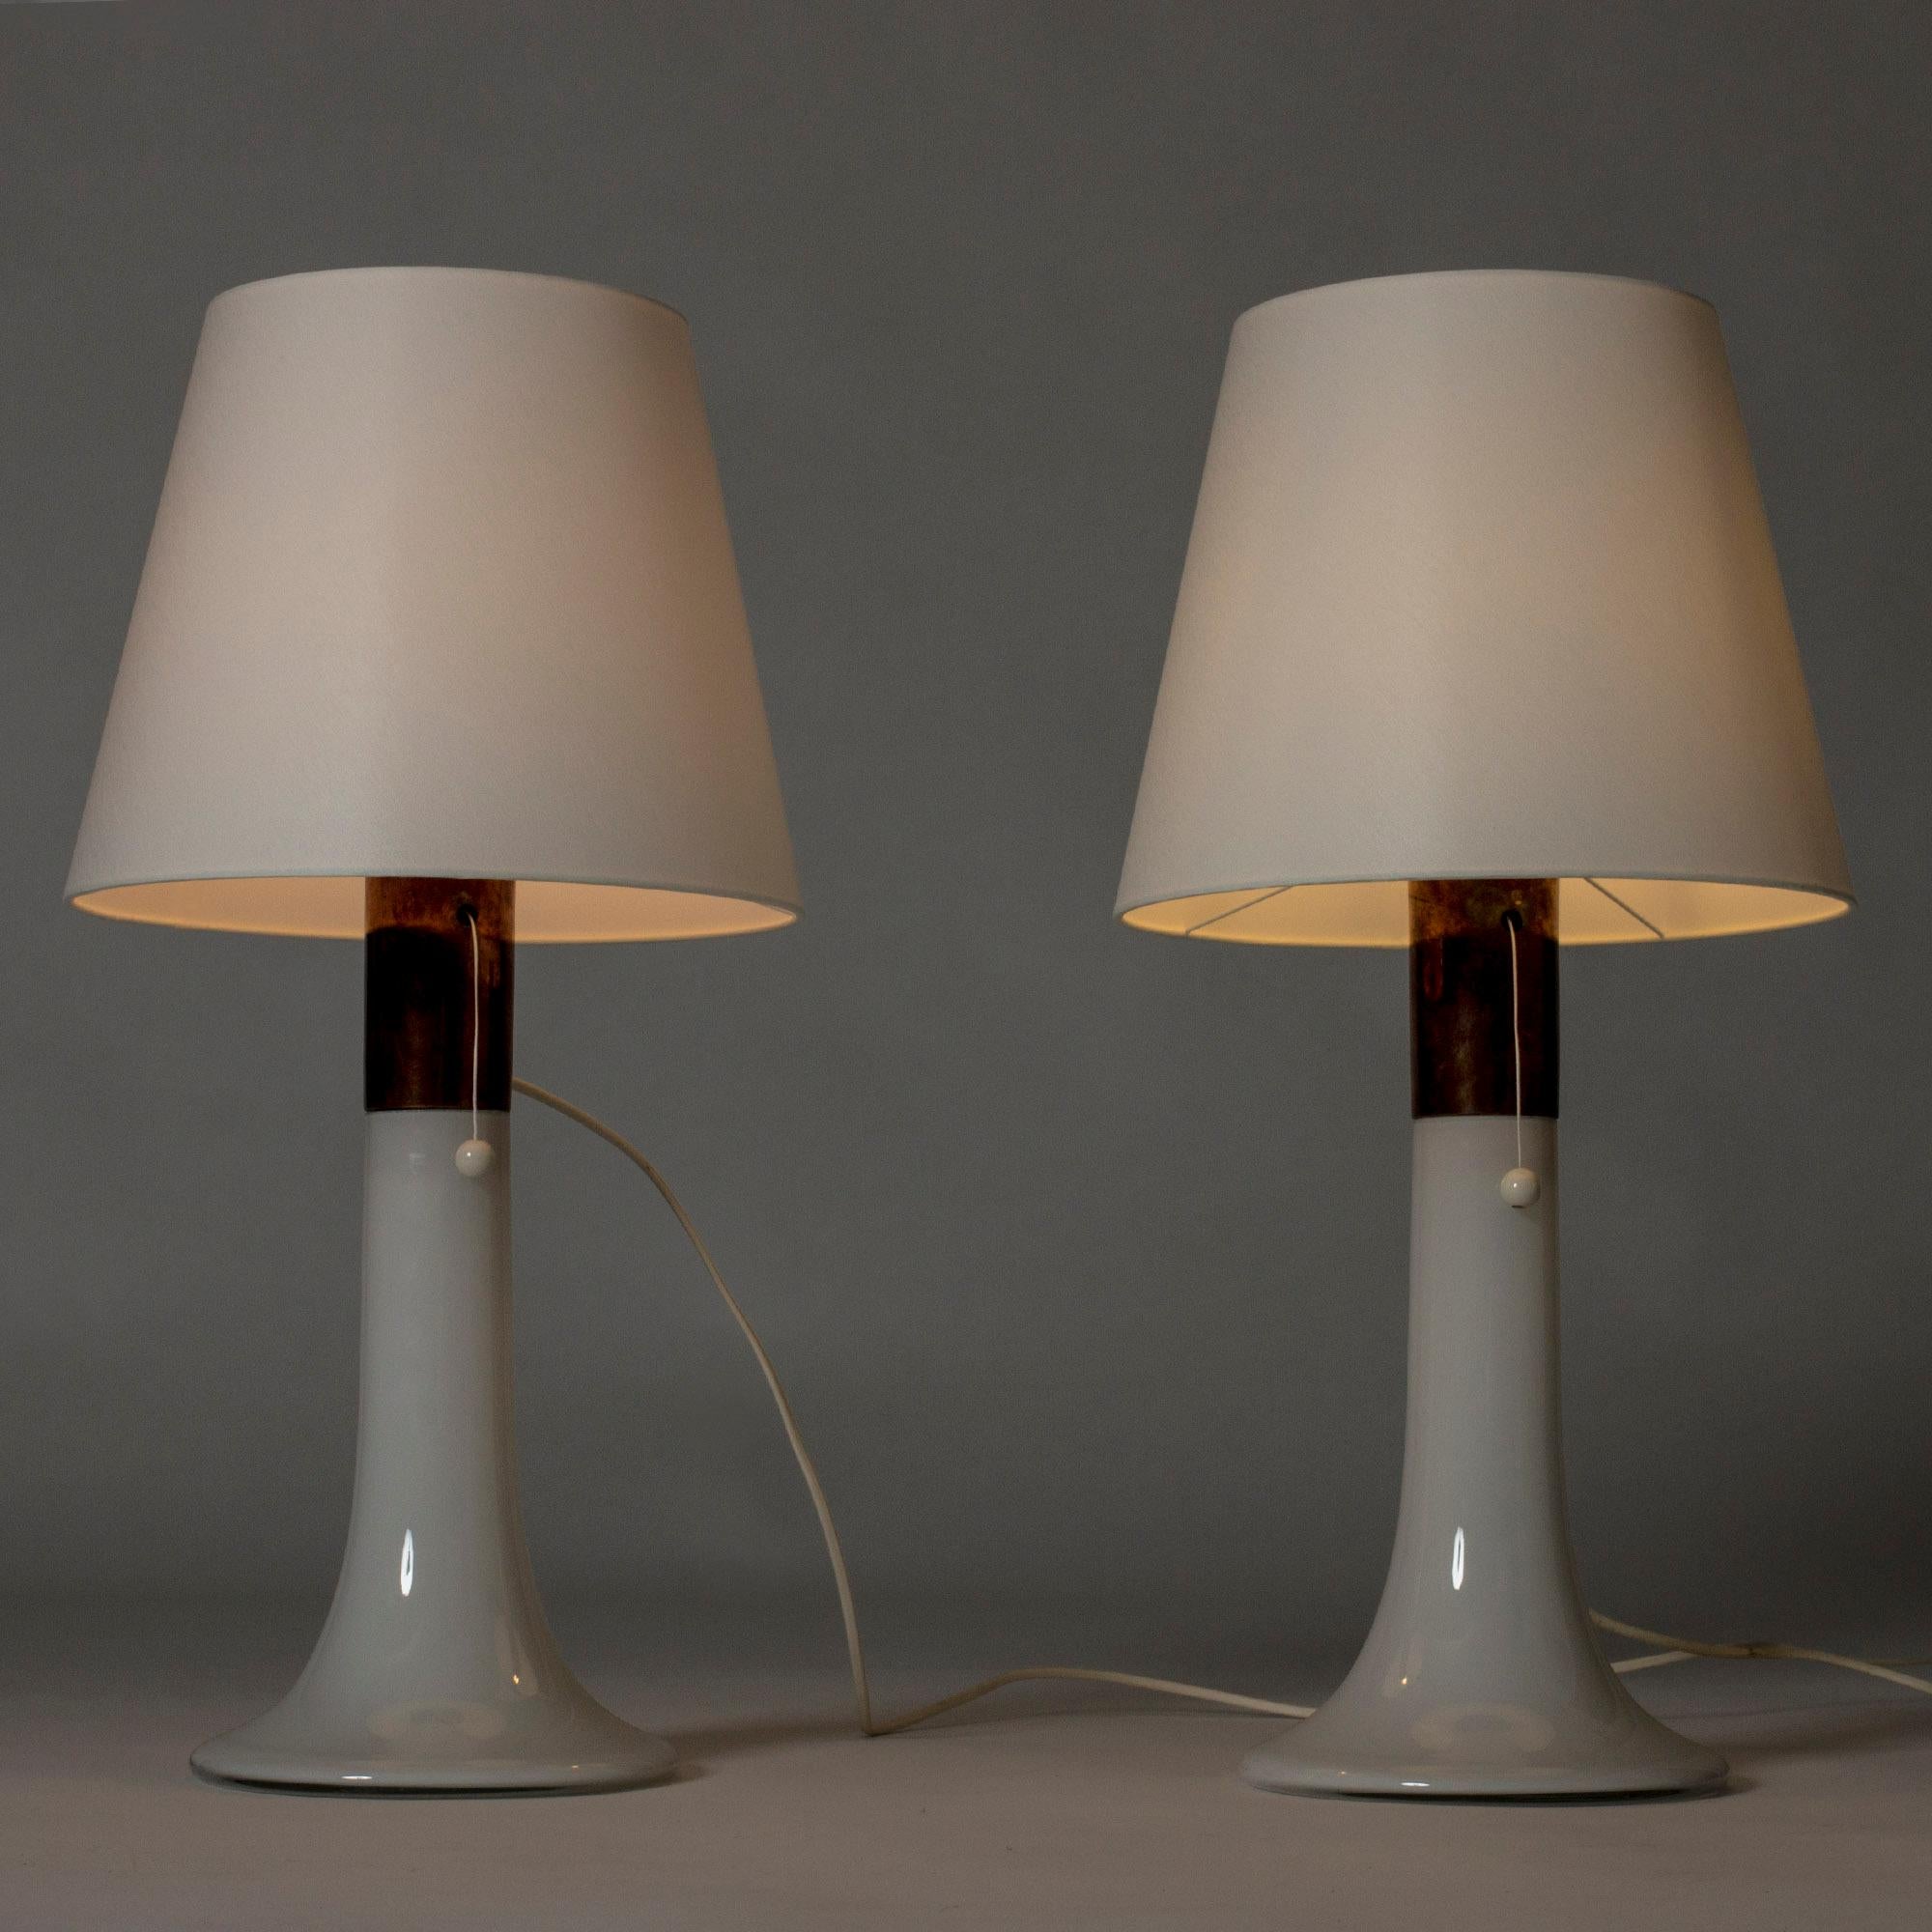 Scandinavian Modern Pair of Glass Table Lamps by Lisa Johansson-Pape for Orno, Sweden, 1950s